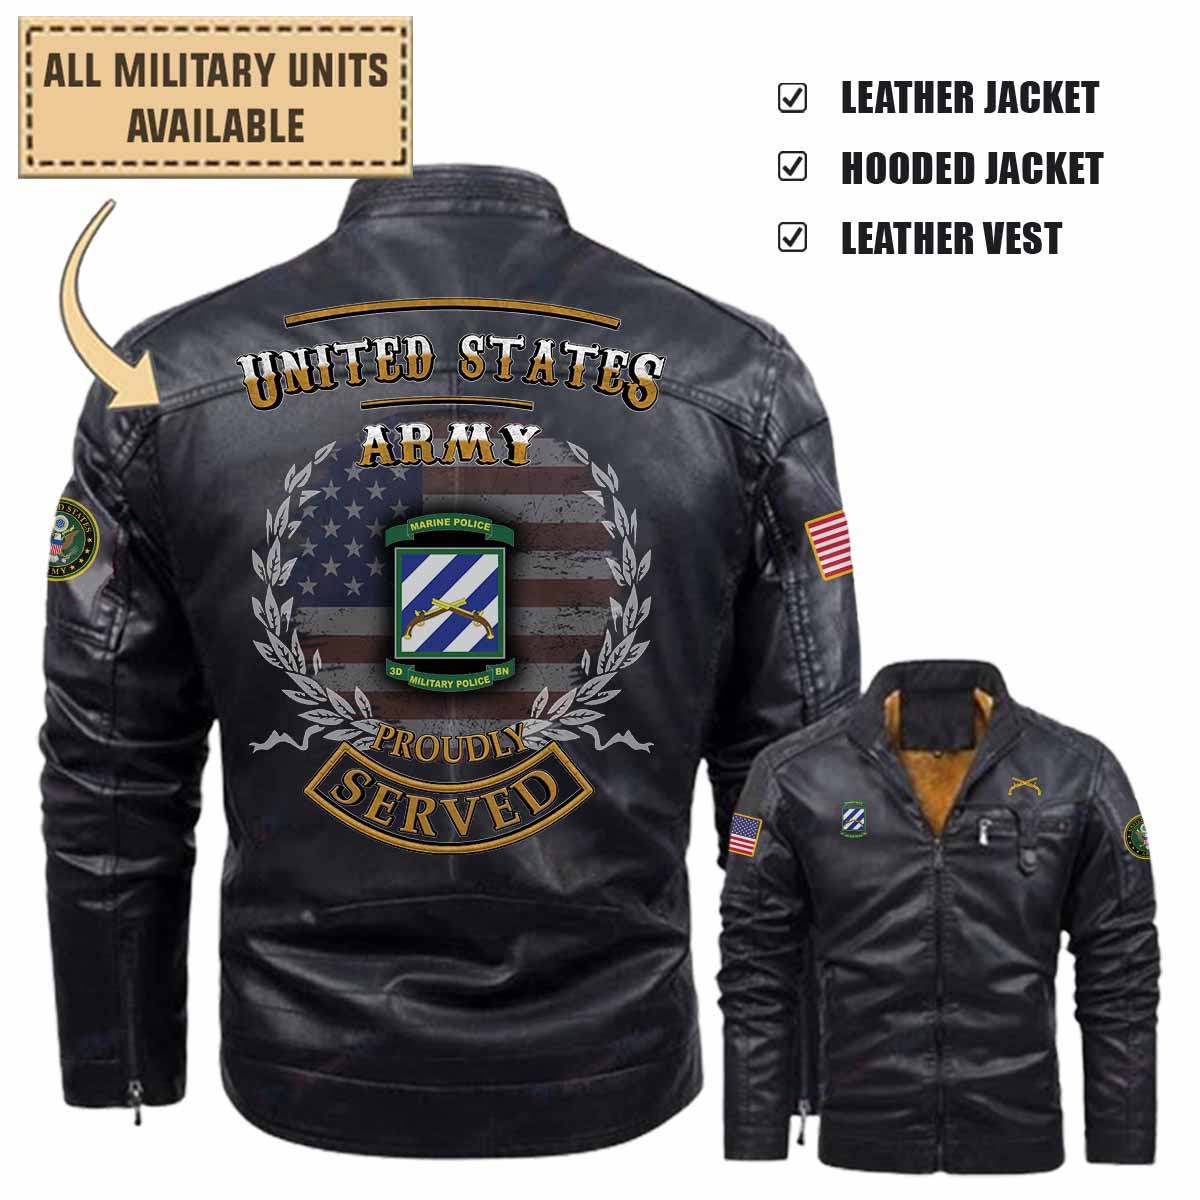 3rd MP BN 3rd Military Police Battalion_Military Leather Jacket and Vest